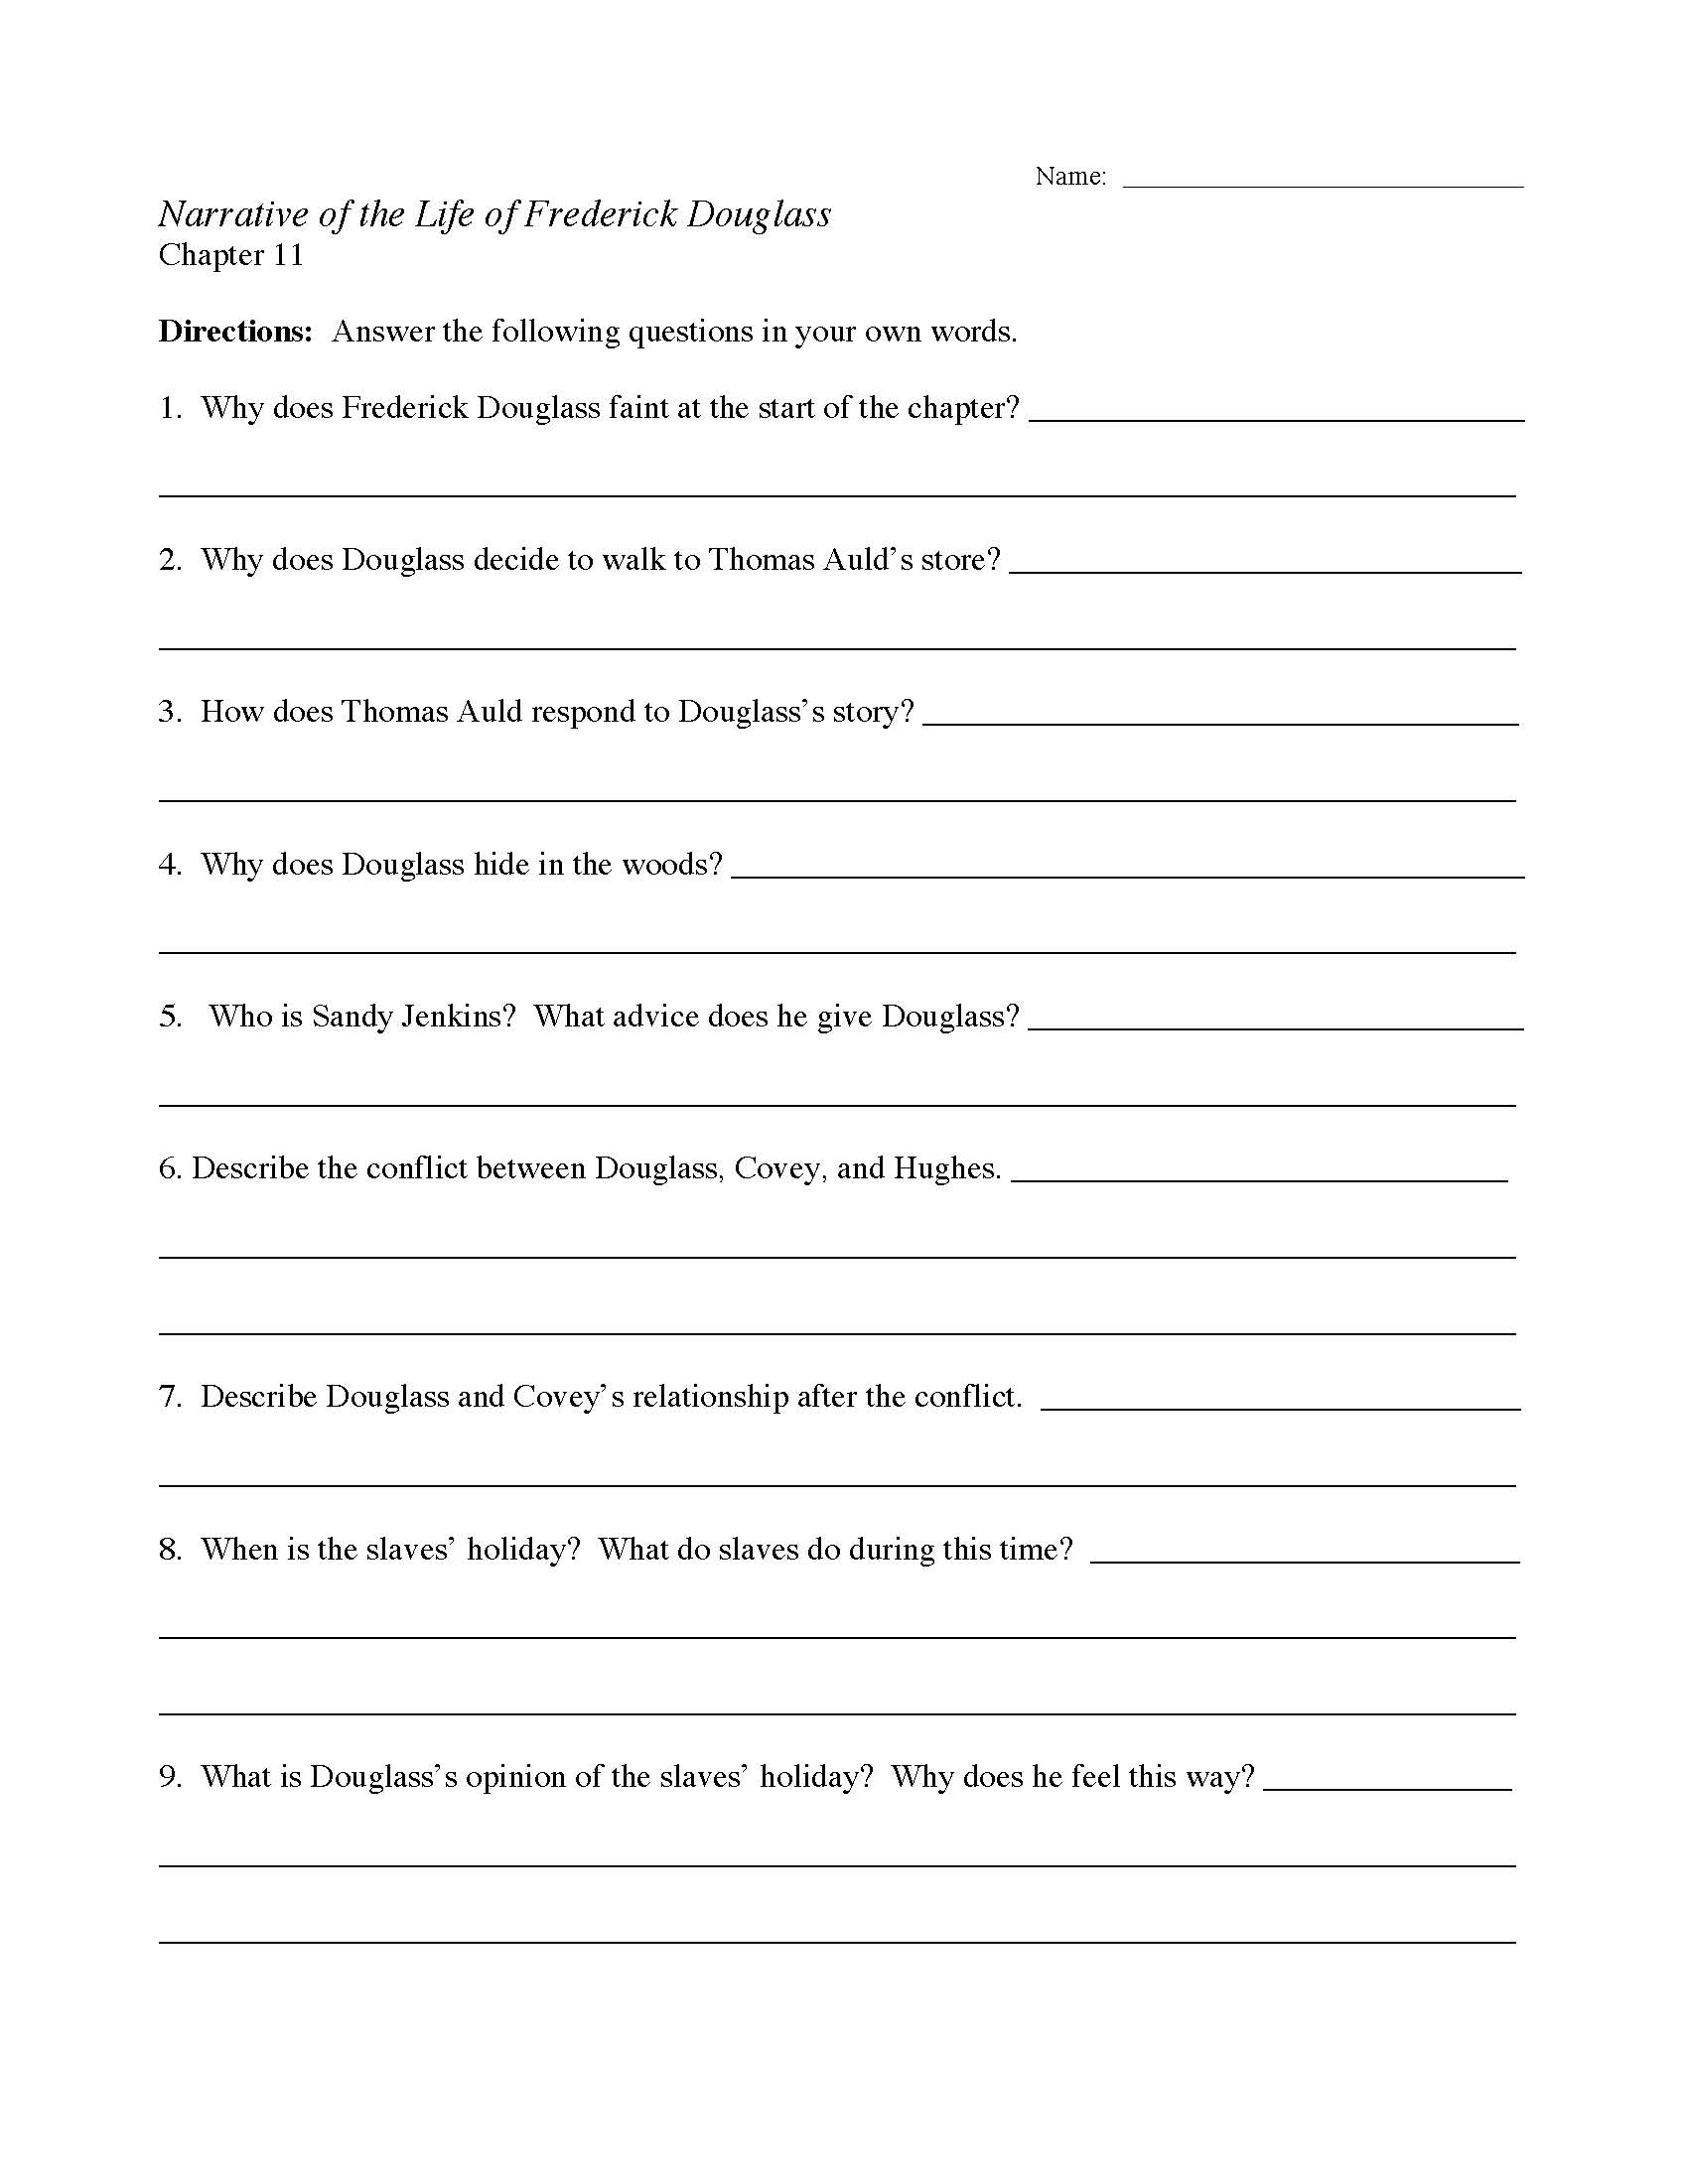 This is a preview image of the Narrative of the Life of Frederick Douglass Chapter Eleven Worksheet.